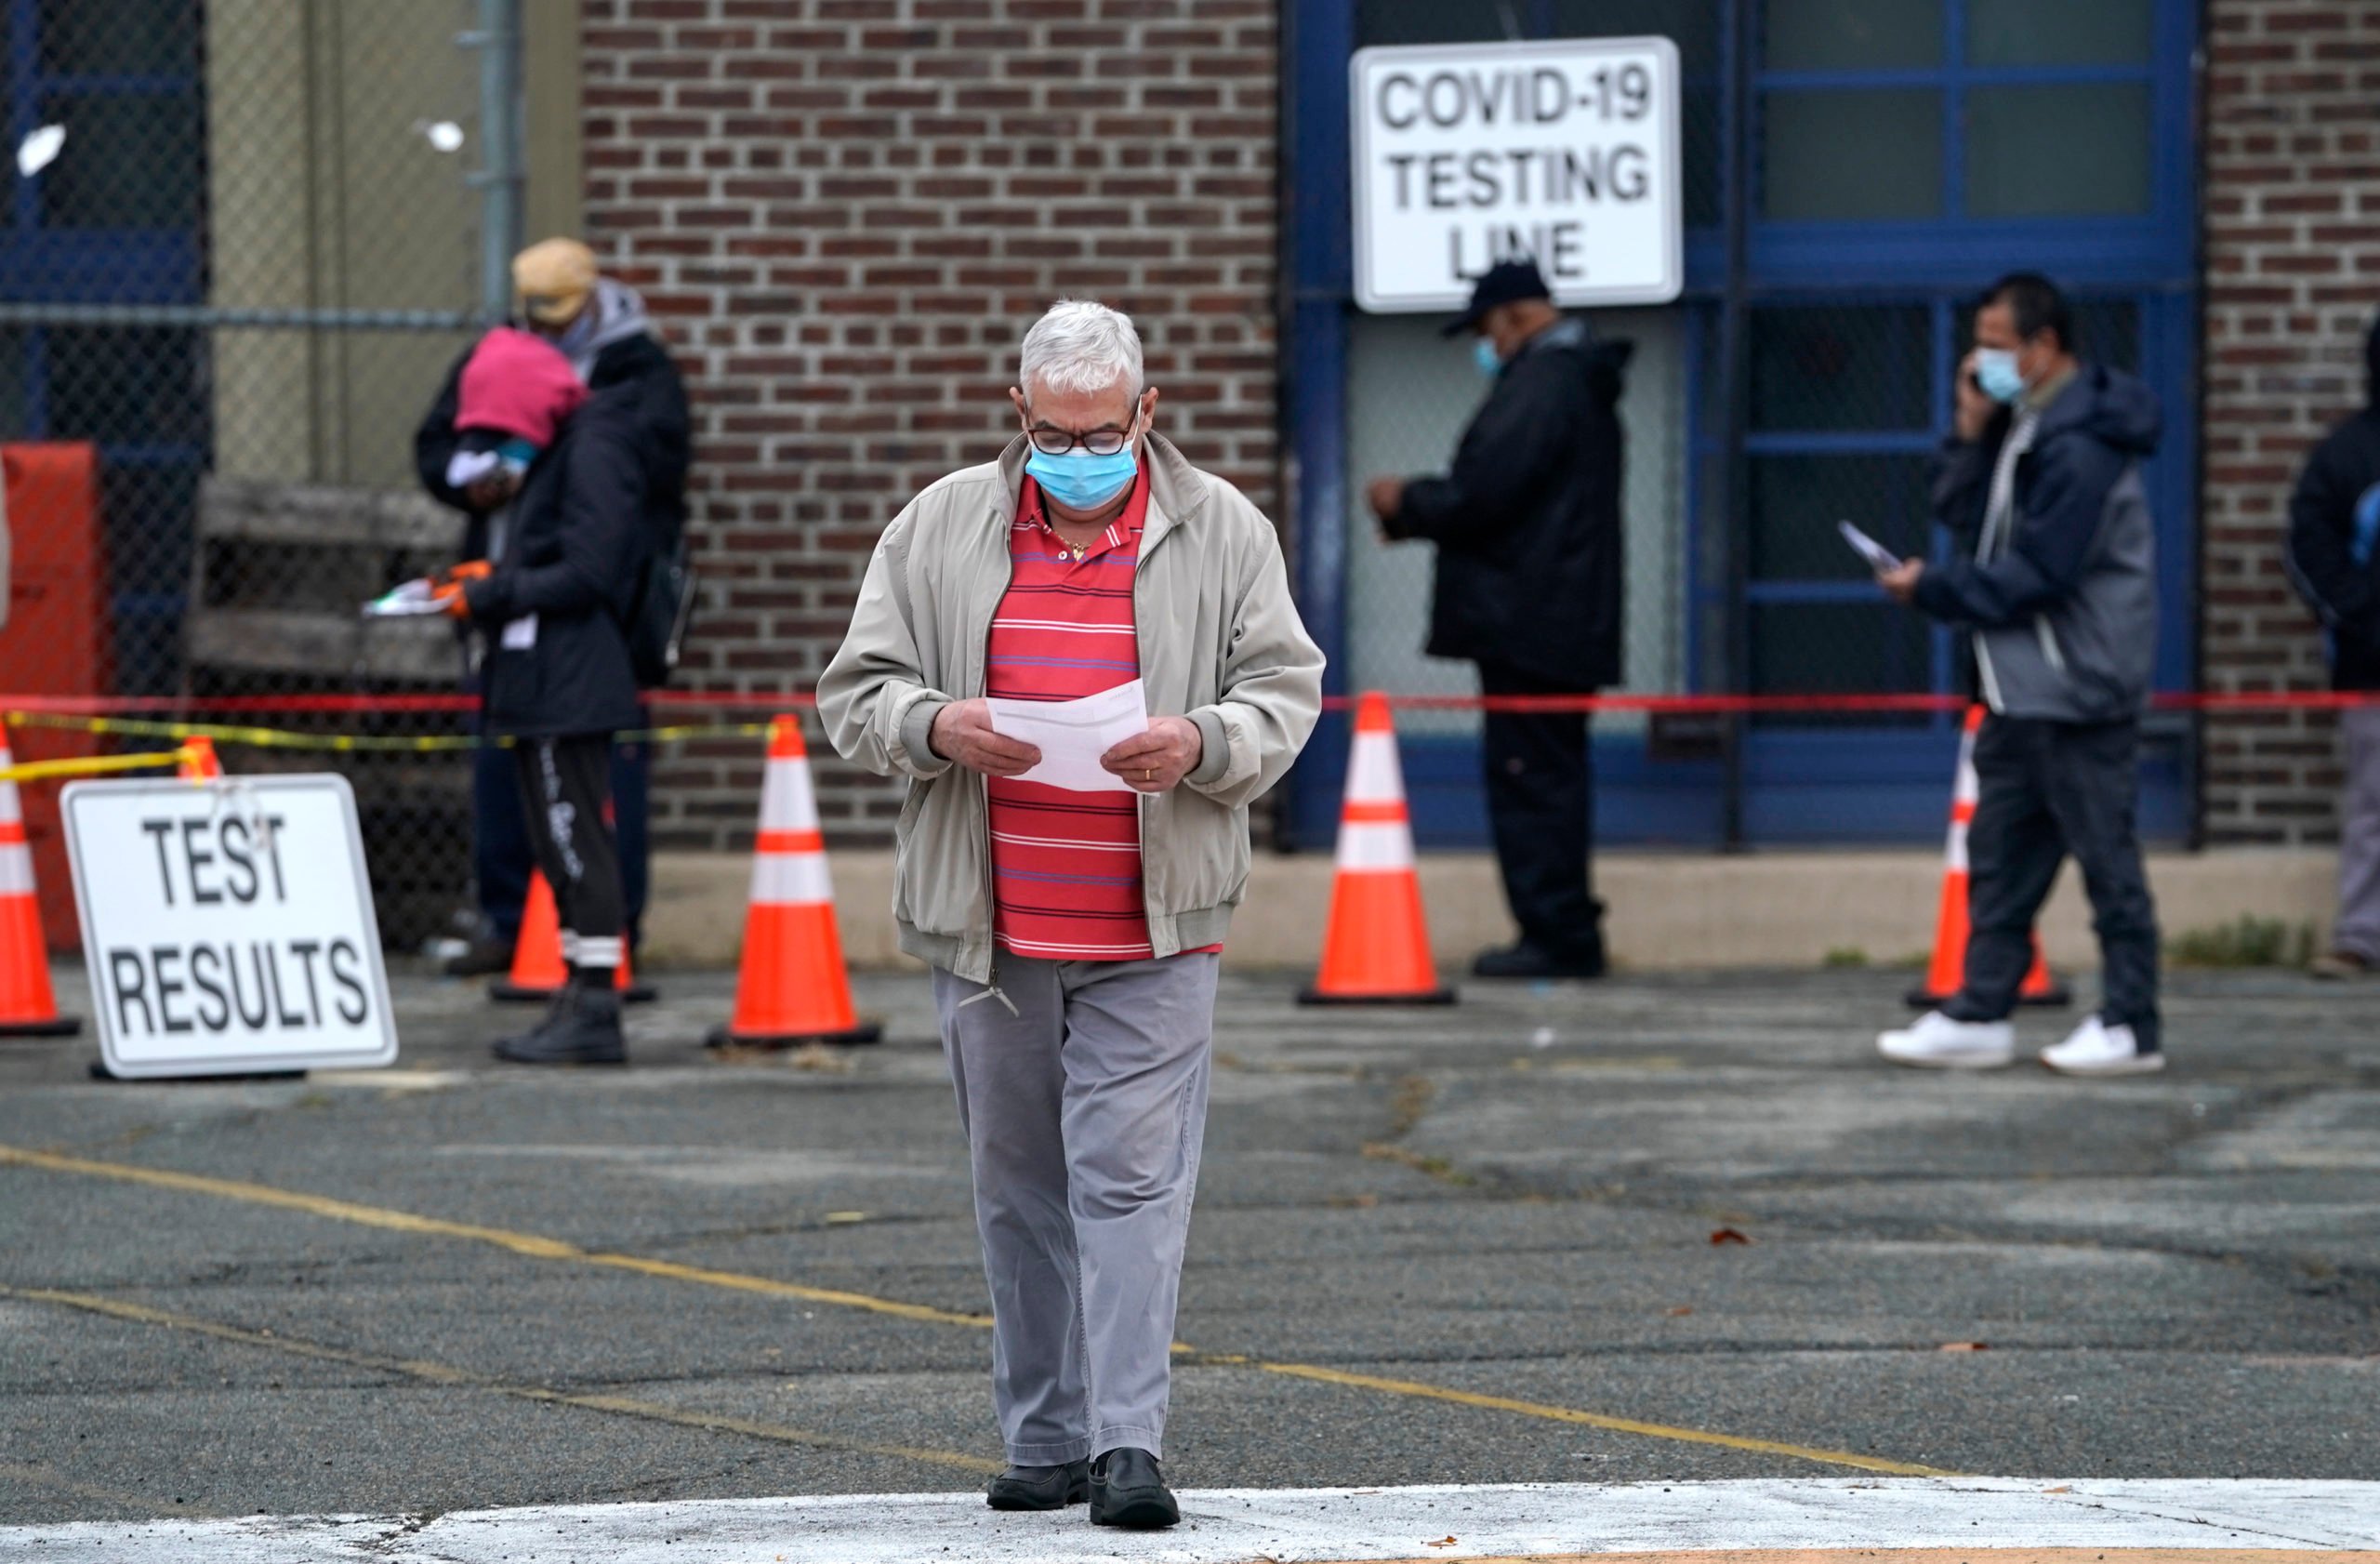 People wait in line to get tested for coronavirus in Newark, New Jersey on Nov. 12. (Timothy Clary/AFP via Getty Images)